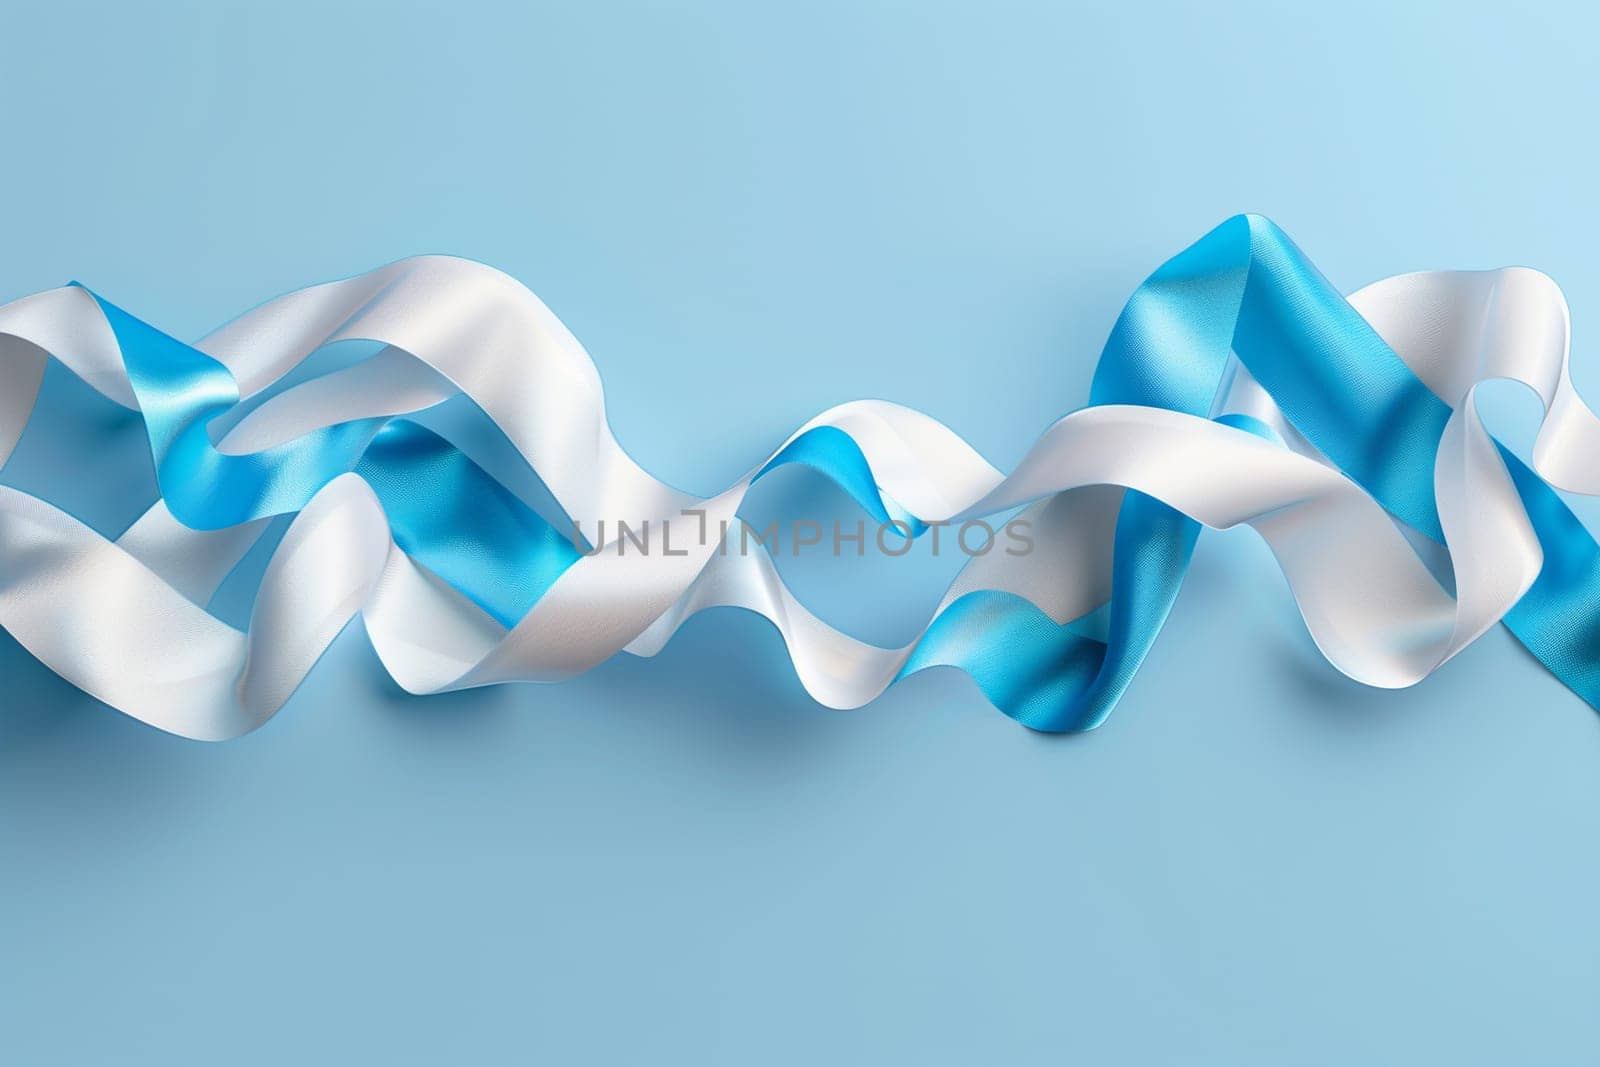 Blue and White Ribbon on Blue Background by Sd28DimoN_1976